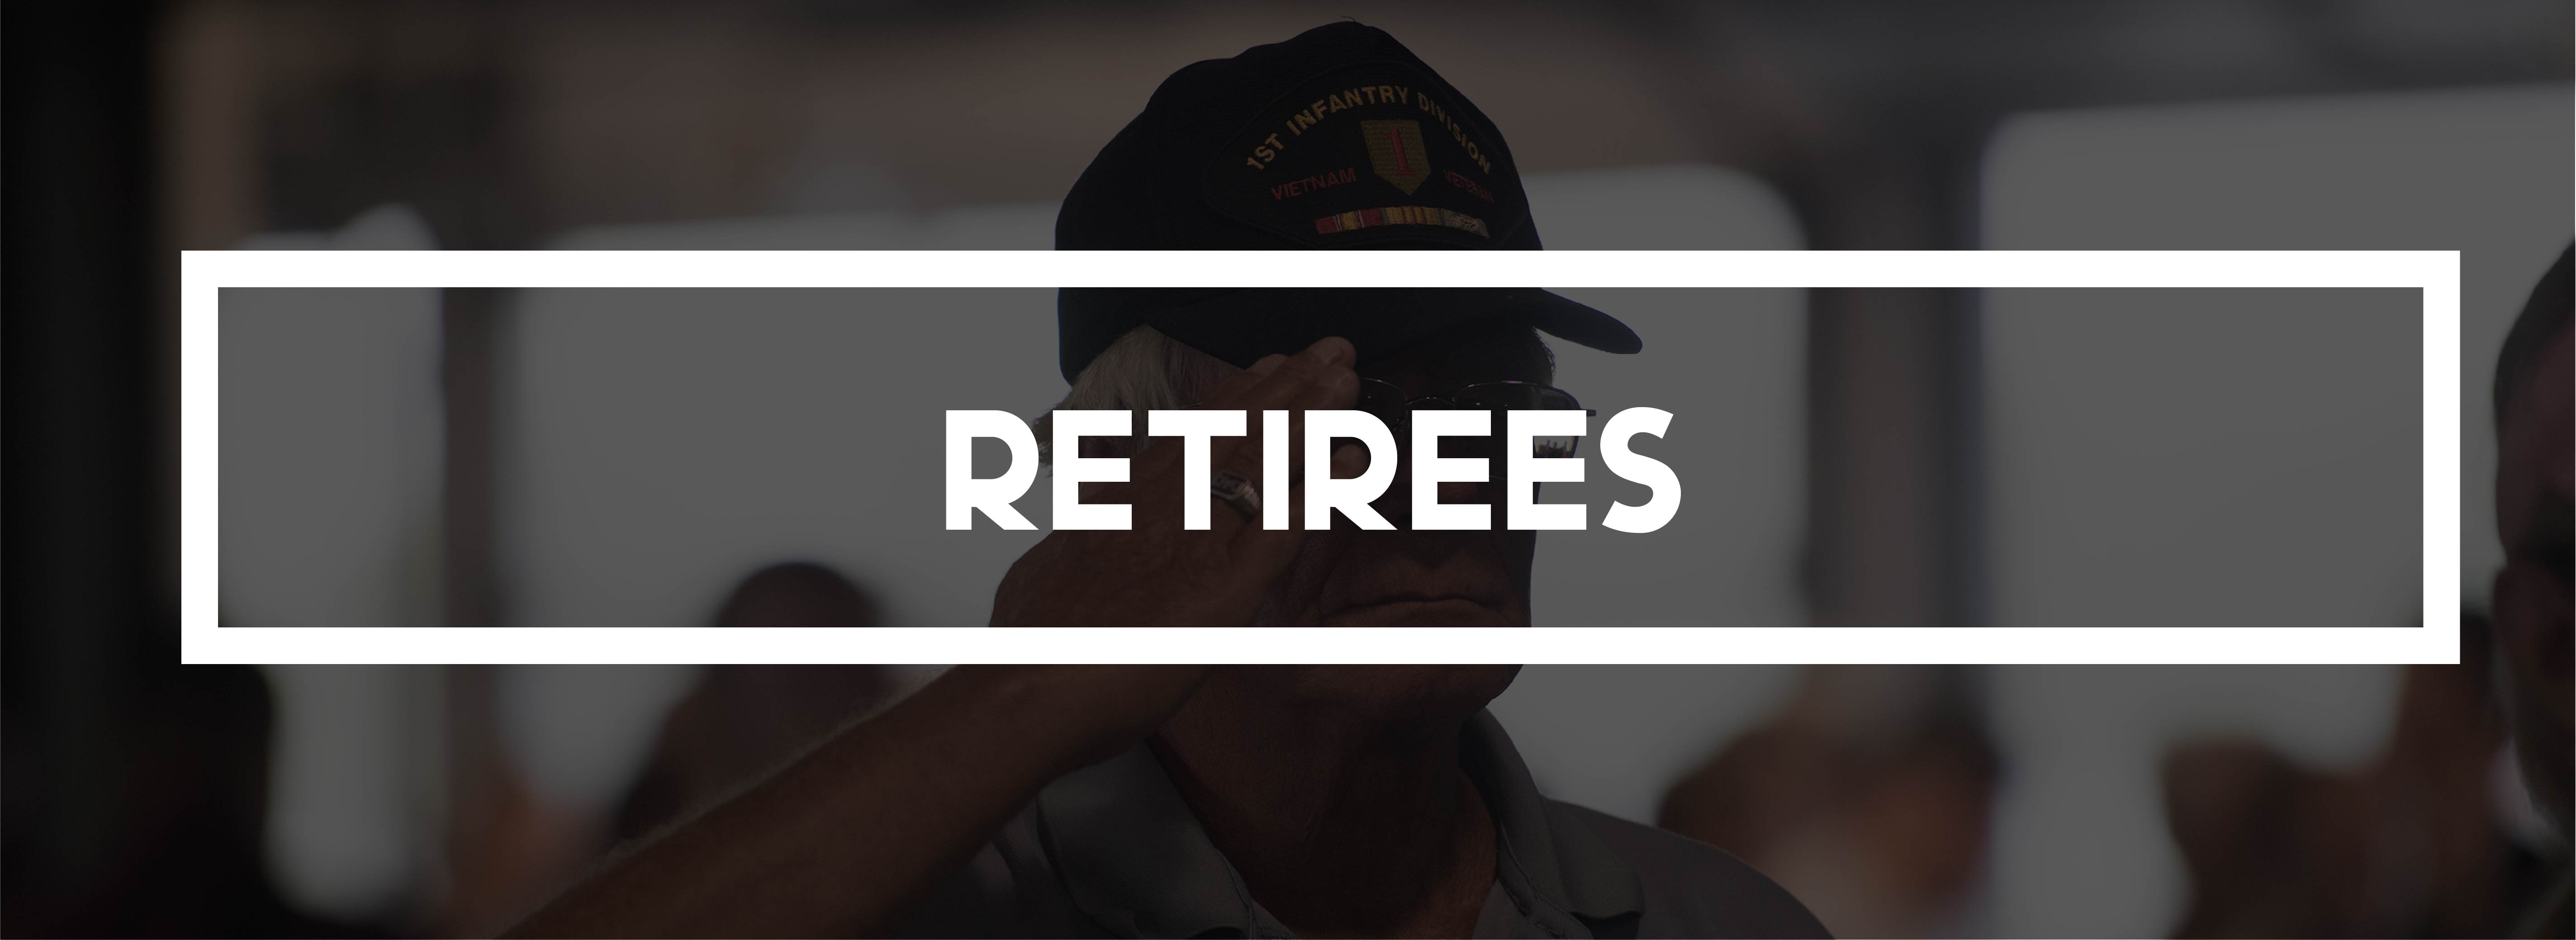 A logo for Retirees